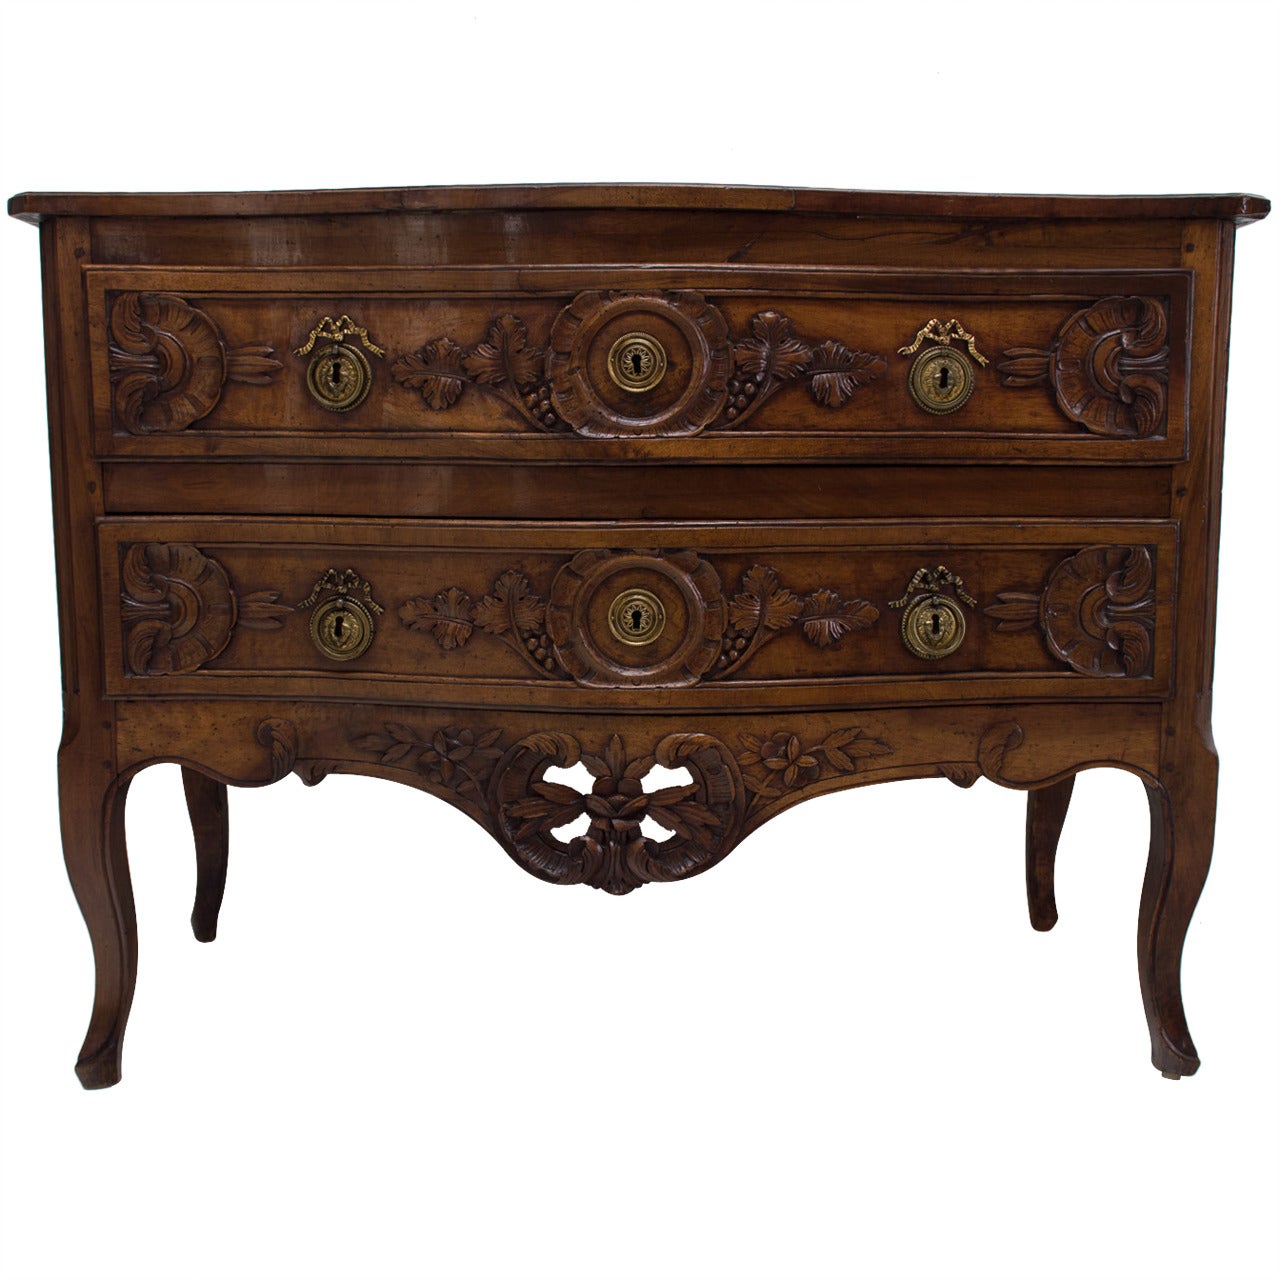 18th c. French Provincial Louis XV Commode or Chest of Drawers